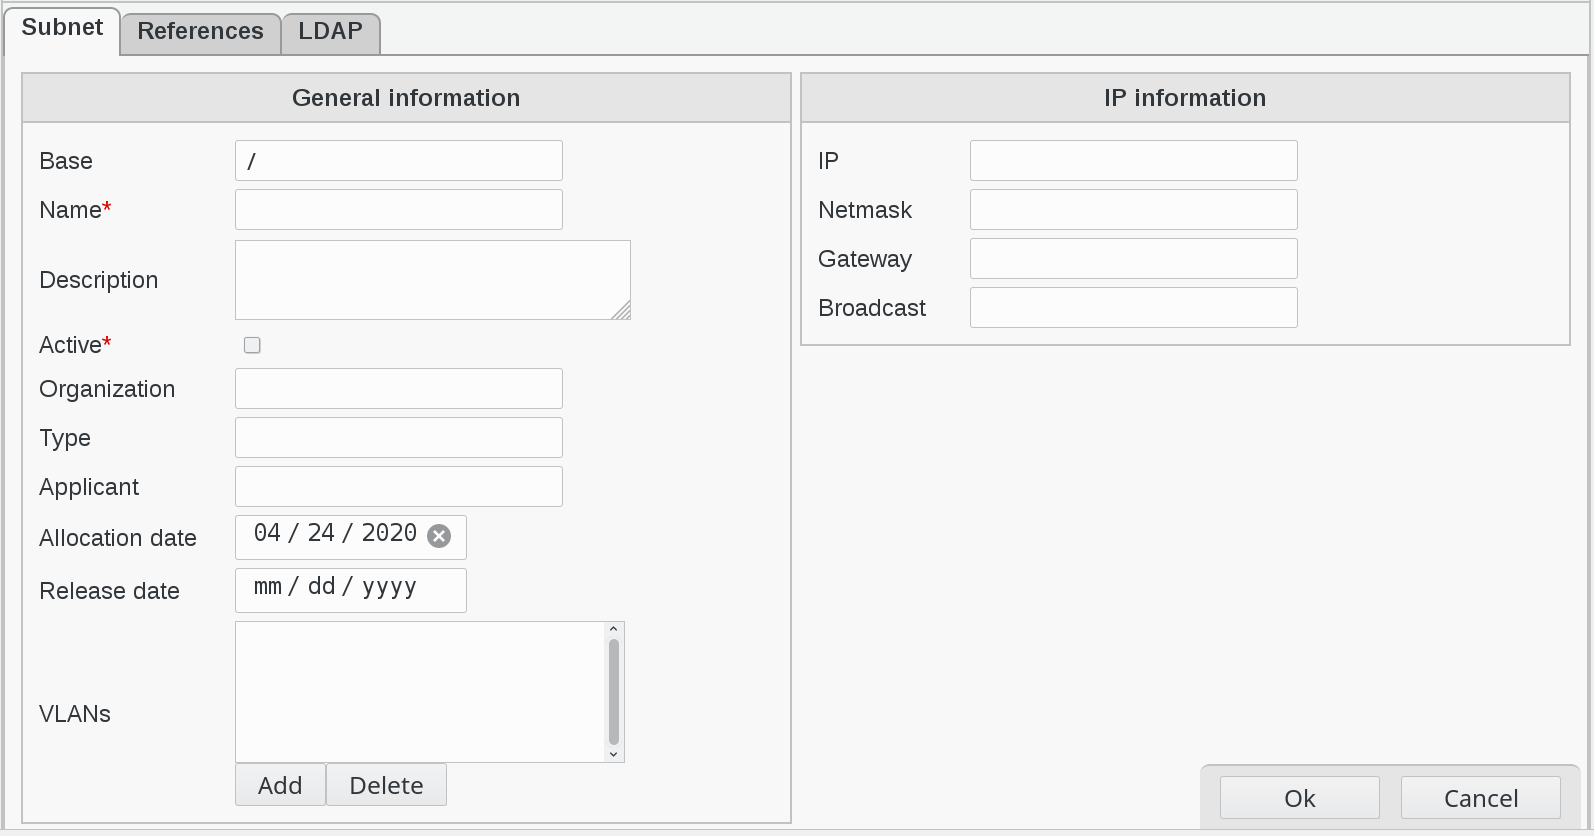 Picture of subnet configuration page in FusionDirectory